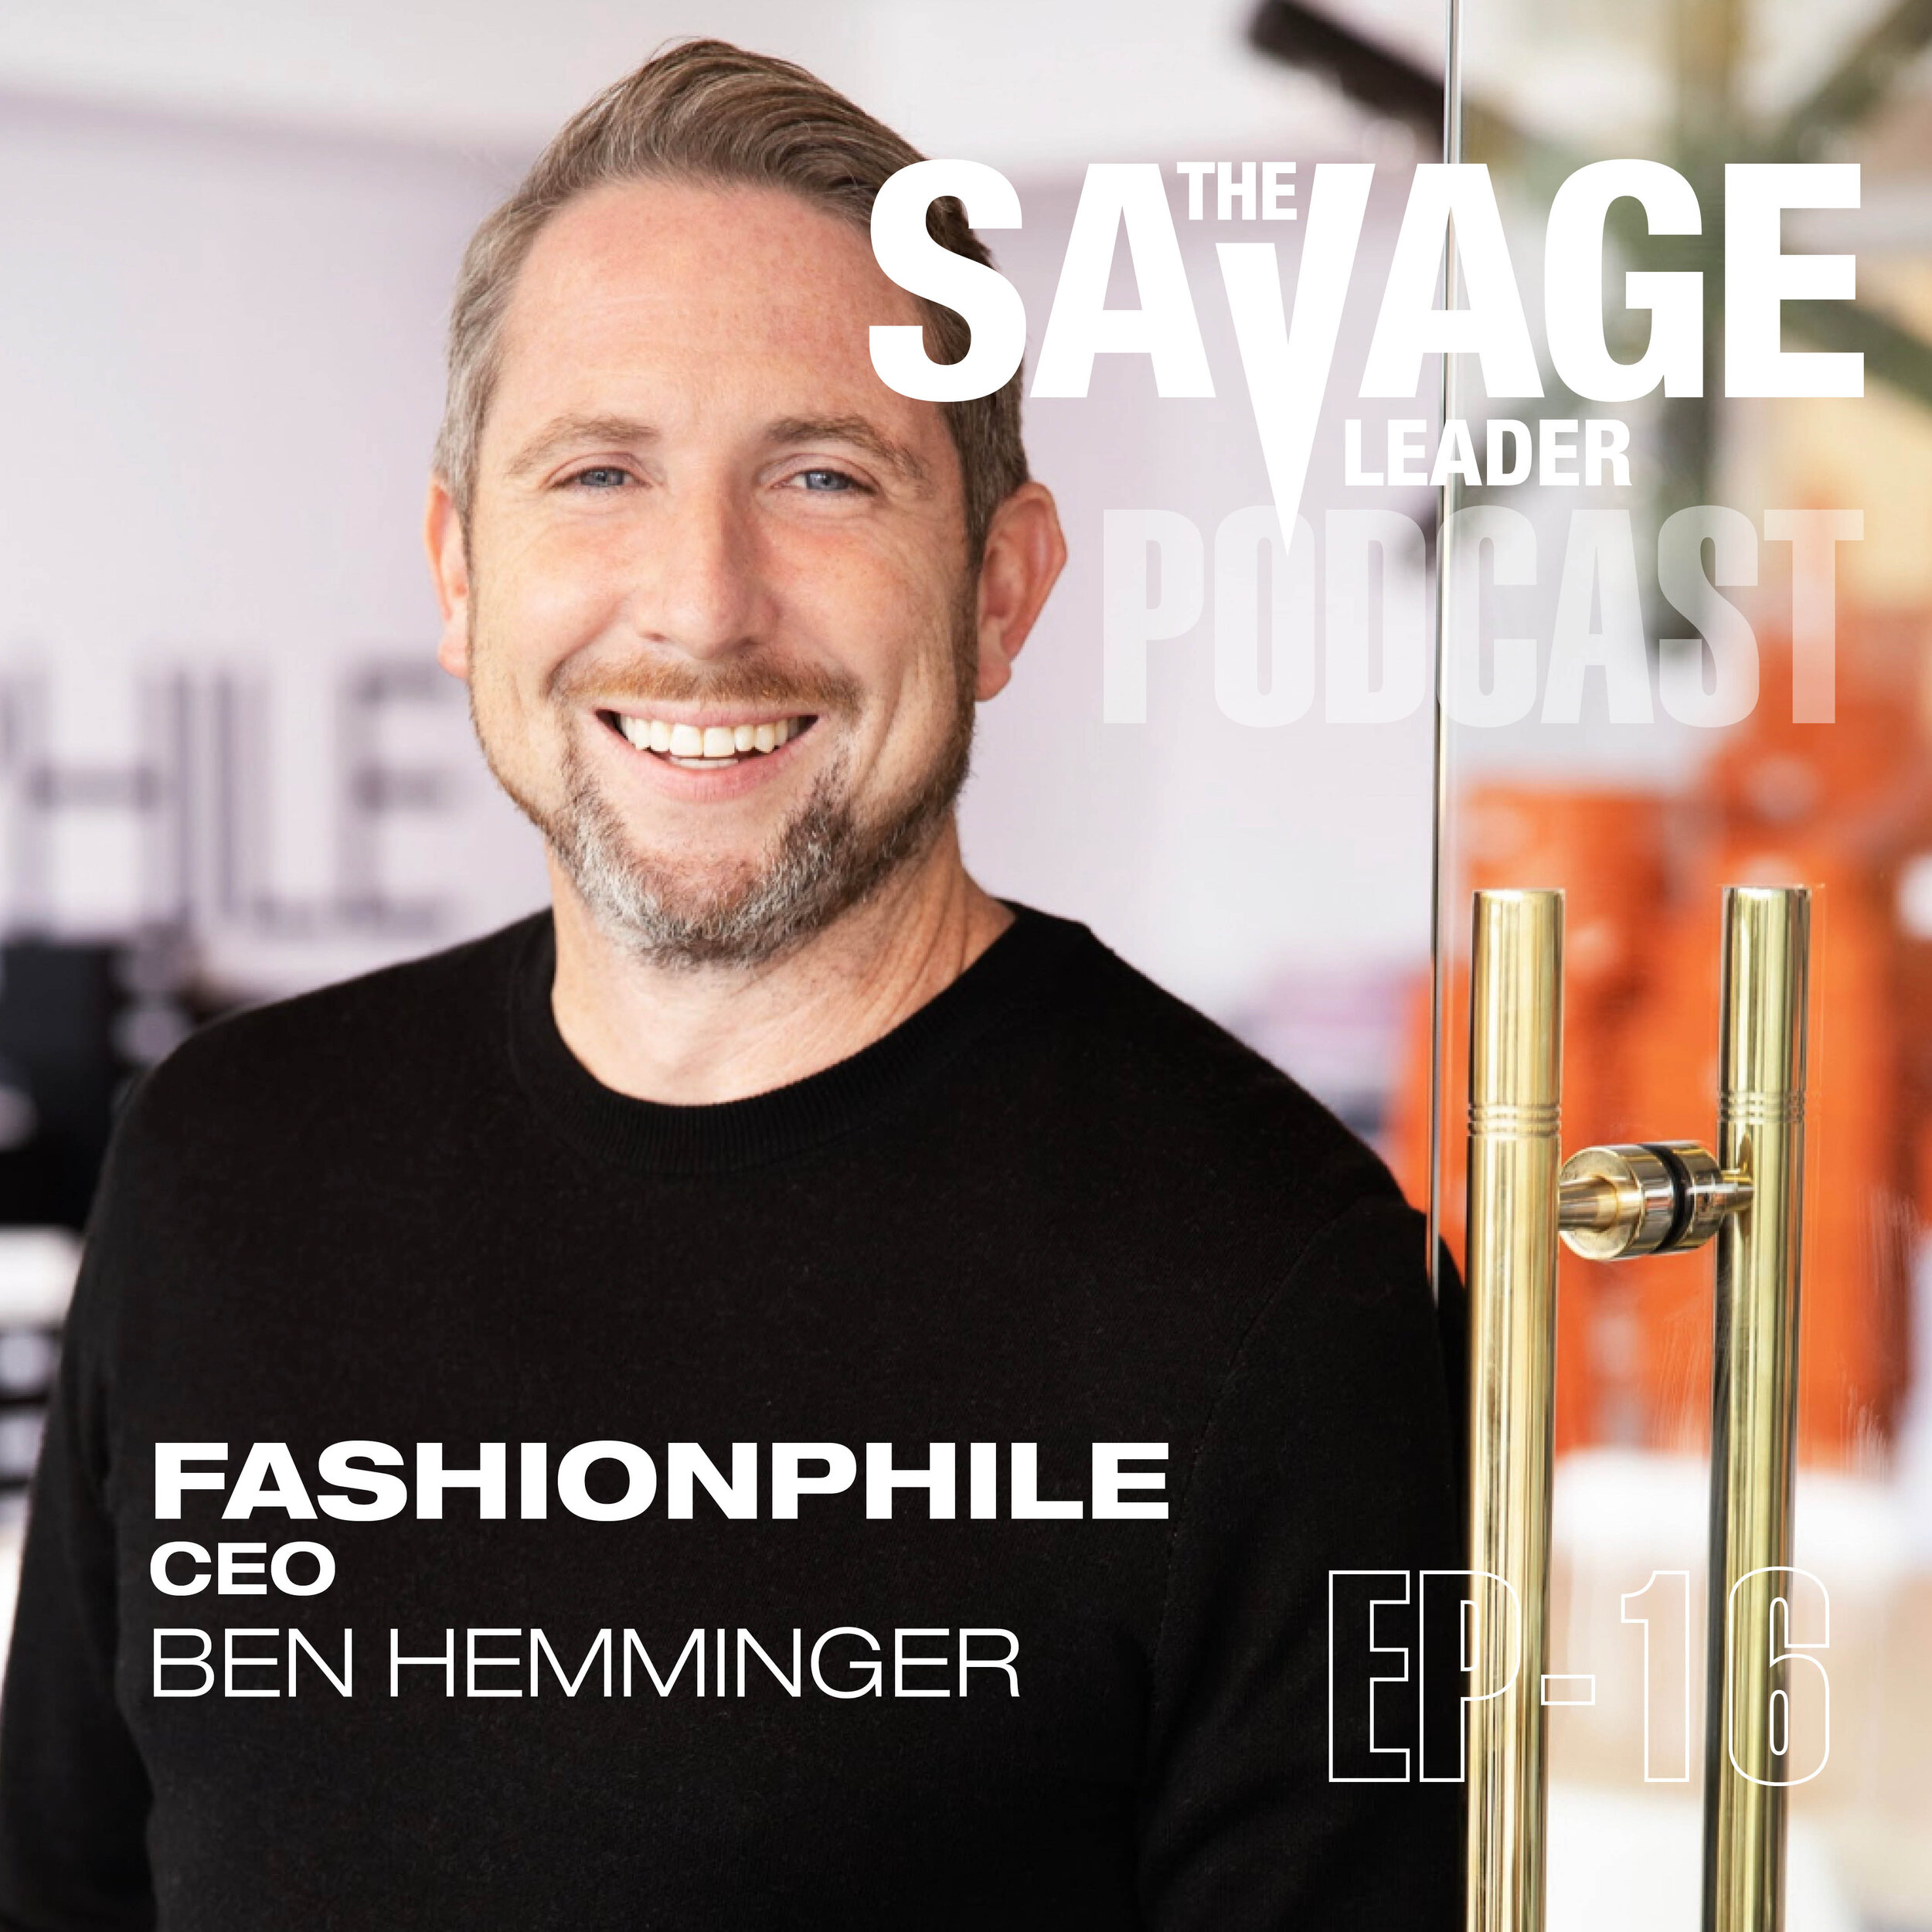 FashionPhile CEO Ben Hemminger on Driving Growth through Authentic